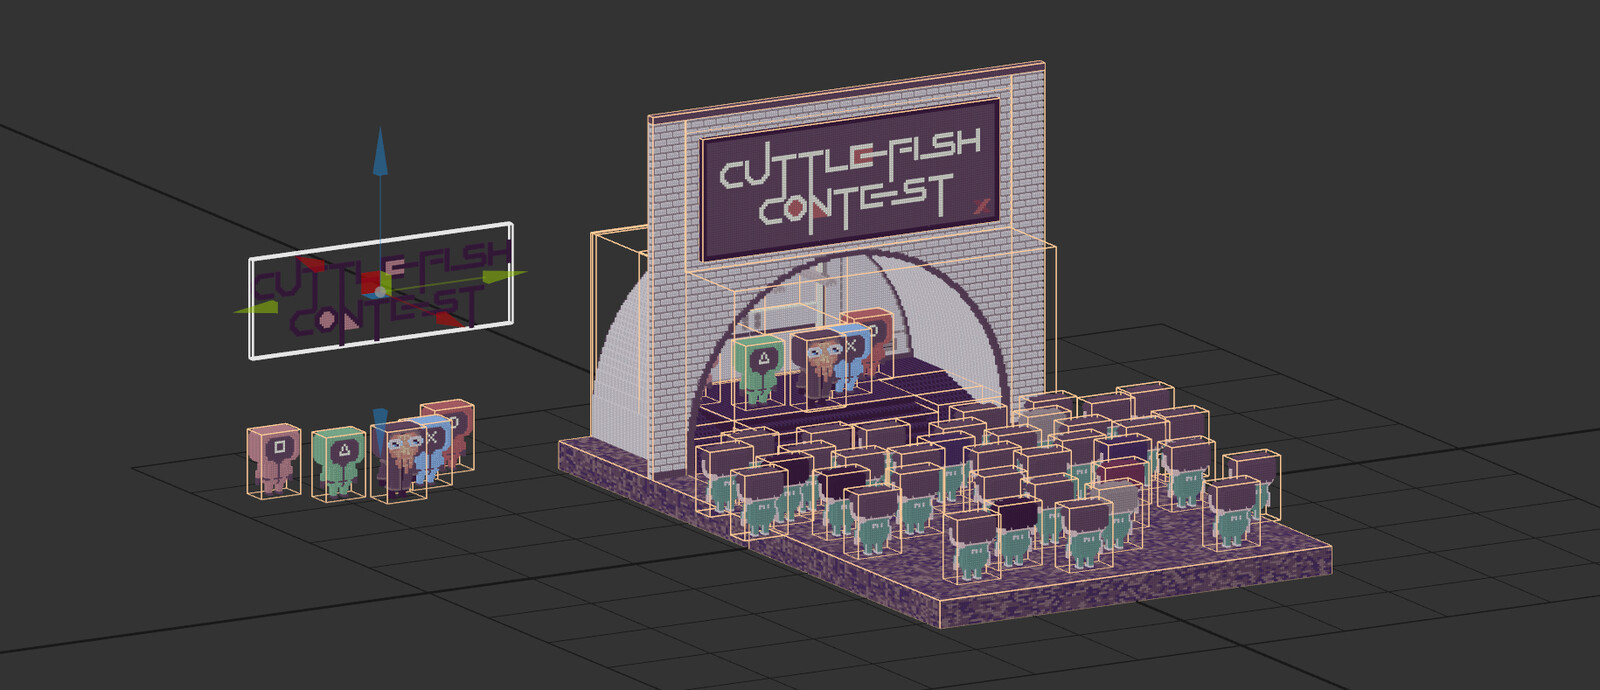 Magicavoxel workspace screen capture of the various components that make up the overall Cuttlefish Contest diorama.